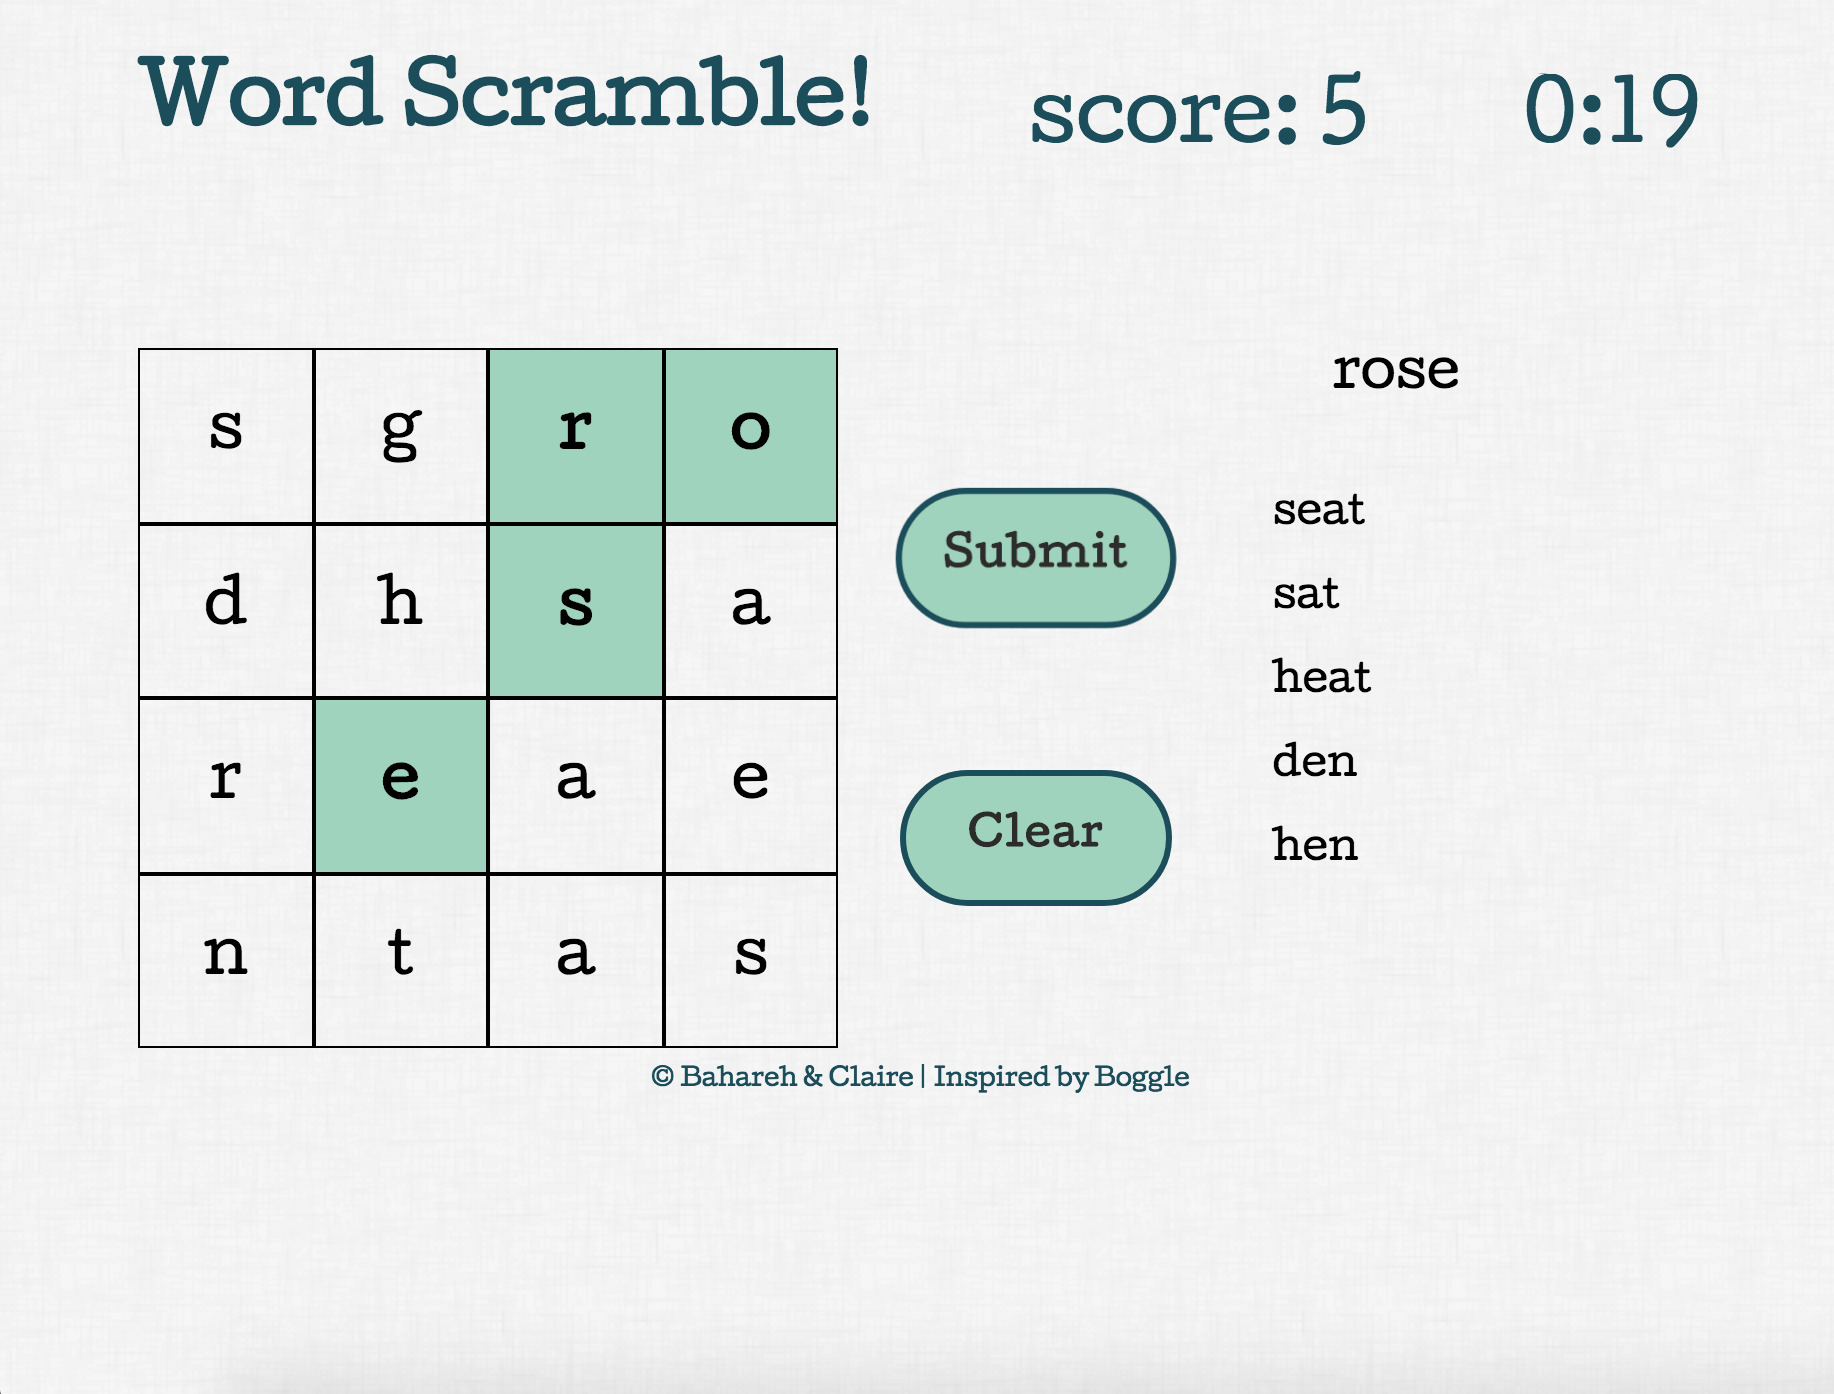 image of word scramble site which resembles boggle